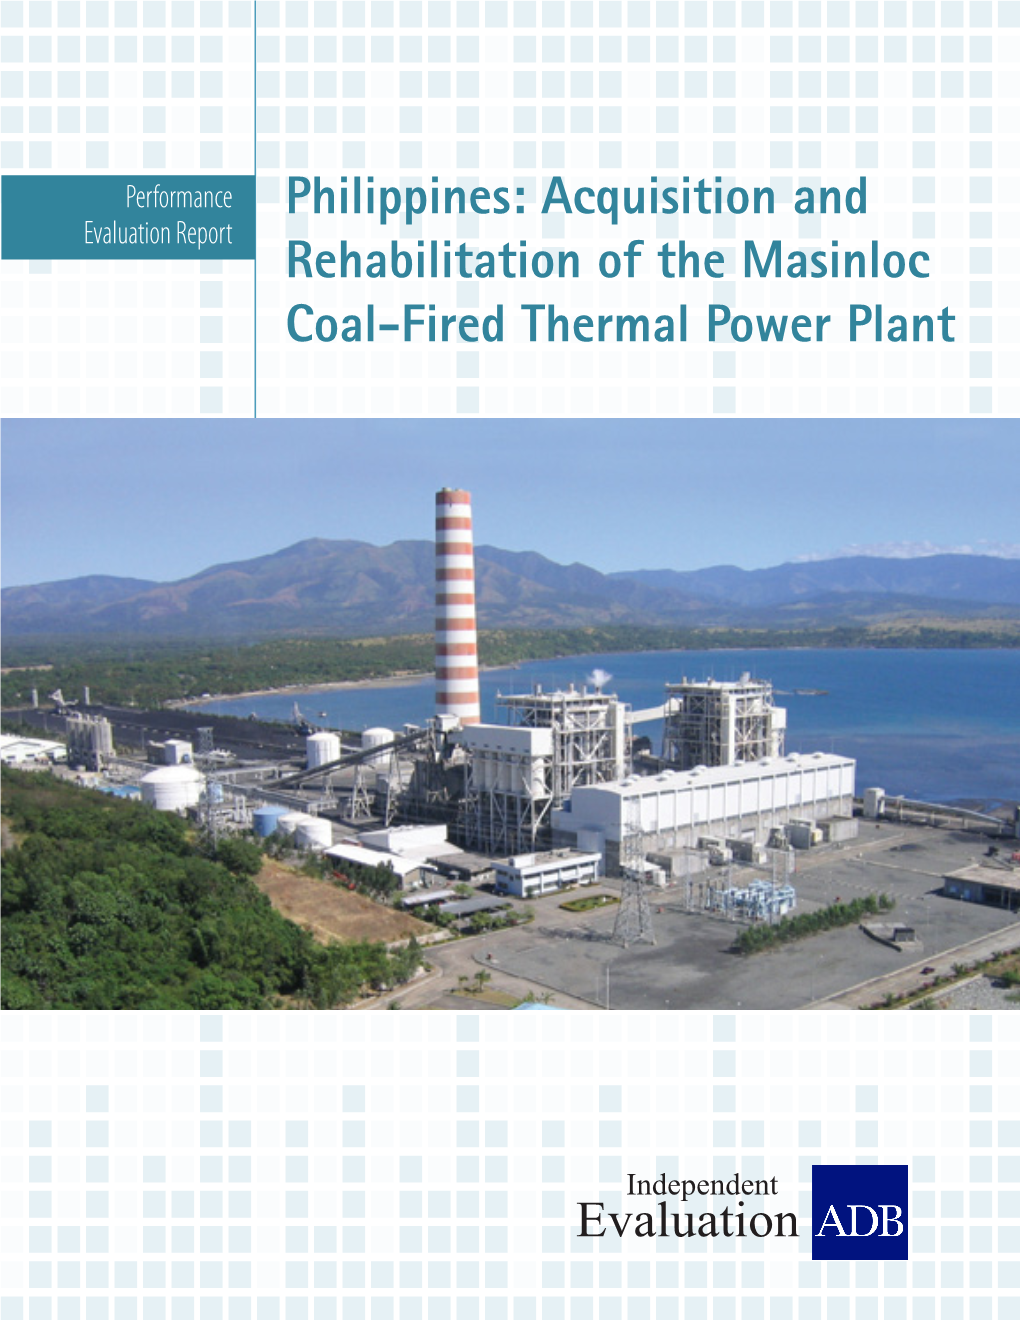 Acquisition and Rehabilitation of the Masinloc Coal-Fired Thermal Power Plant